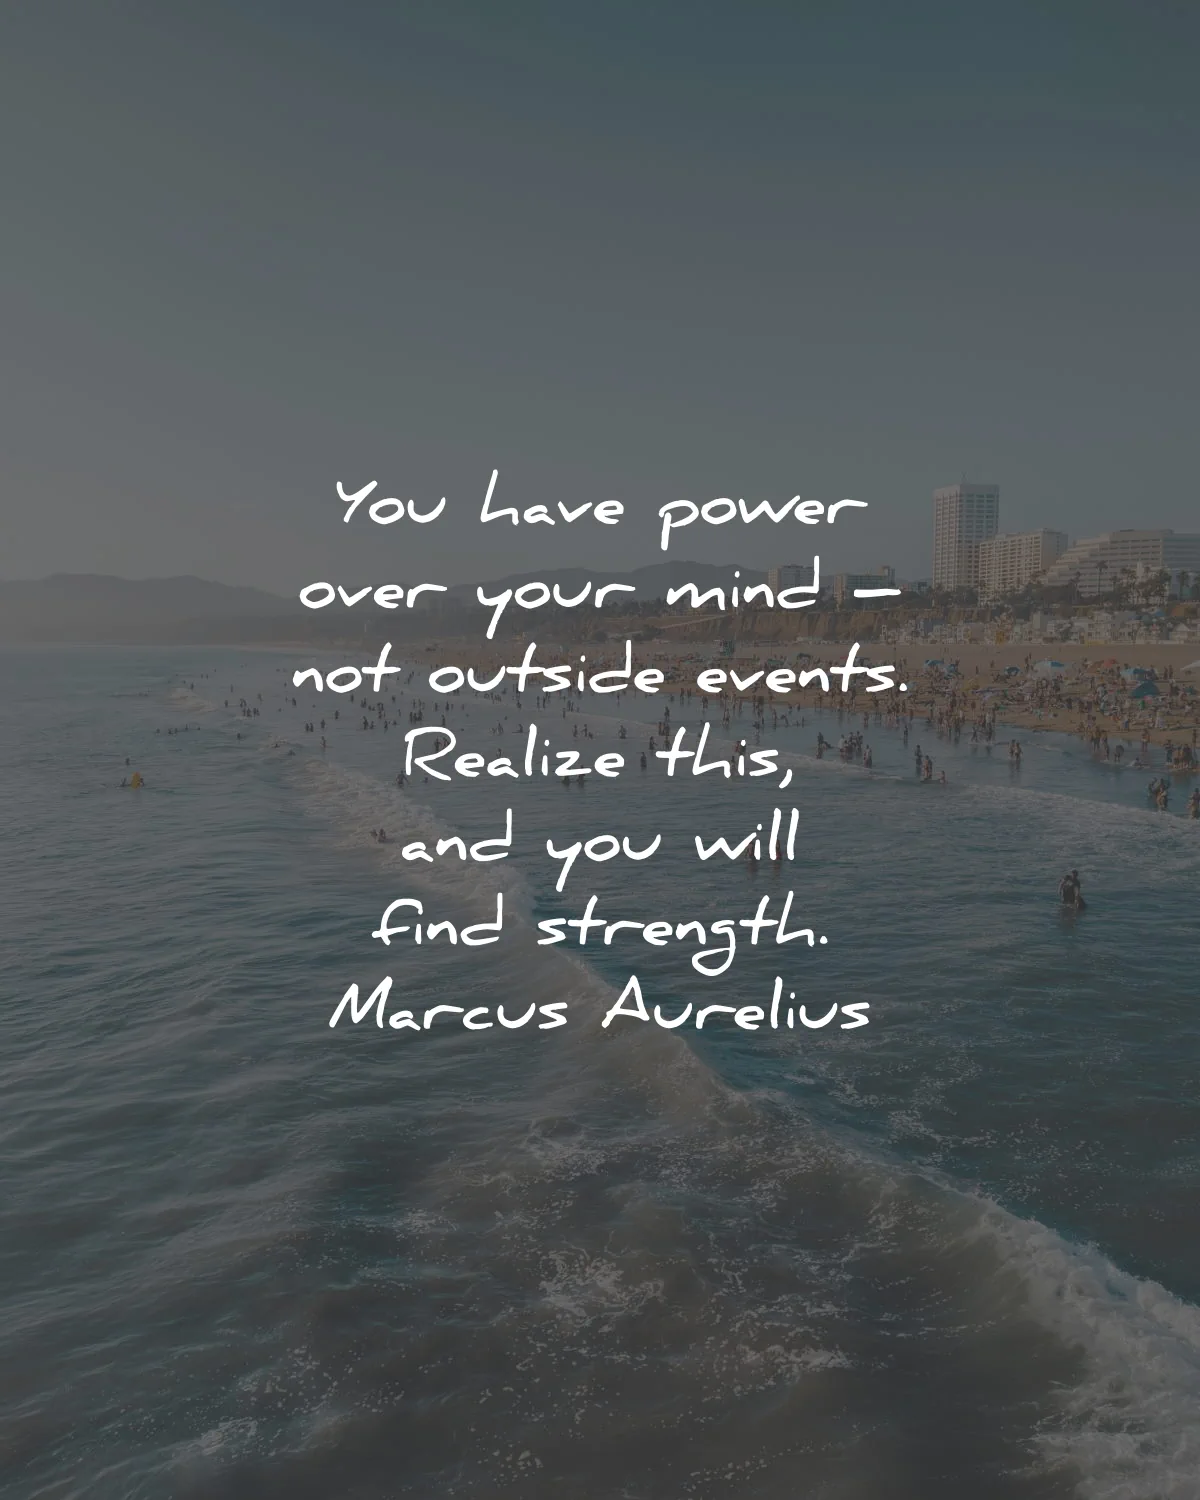 strength quotes power mind outside events realize this marcus aurelius wisdom